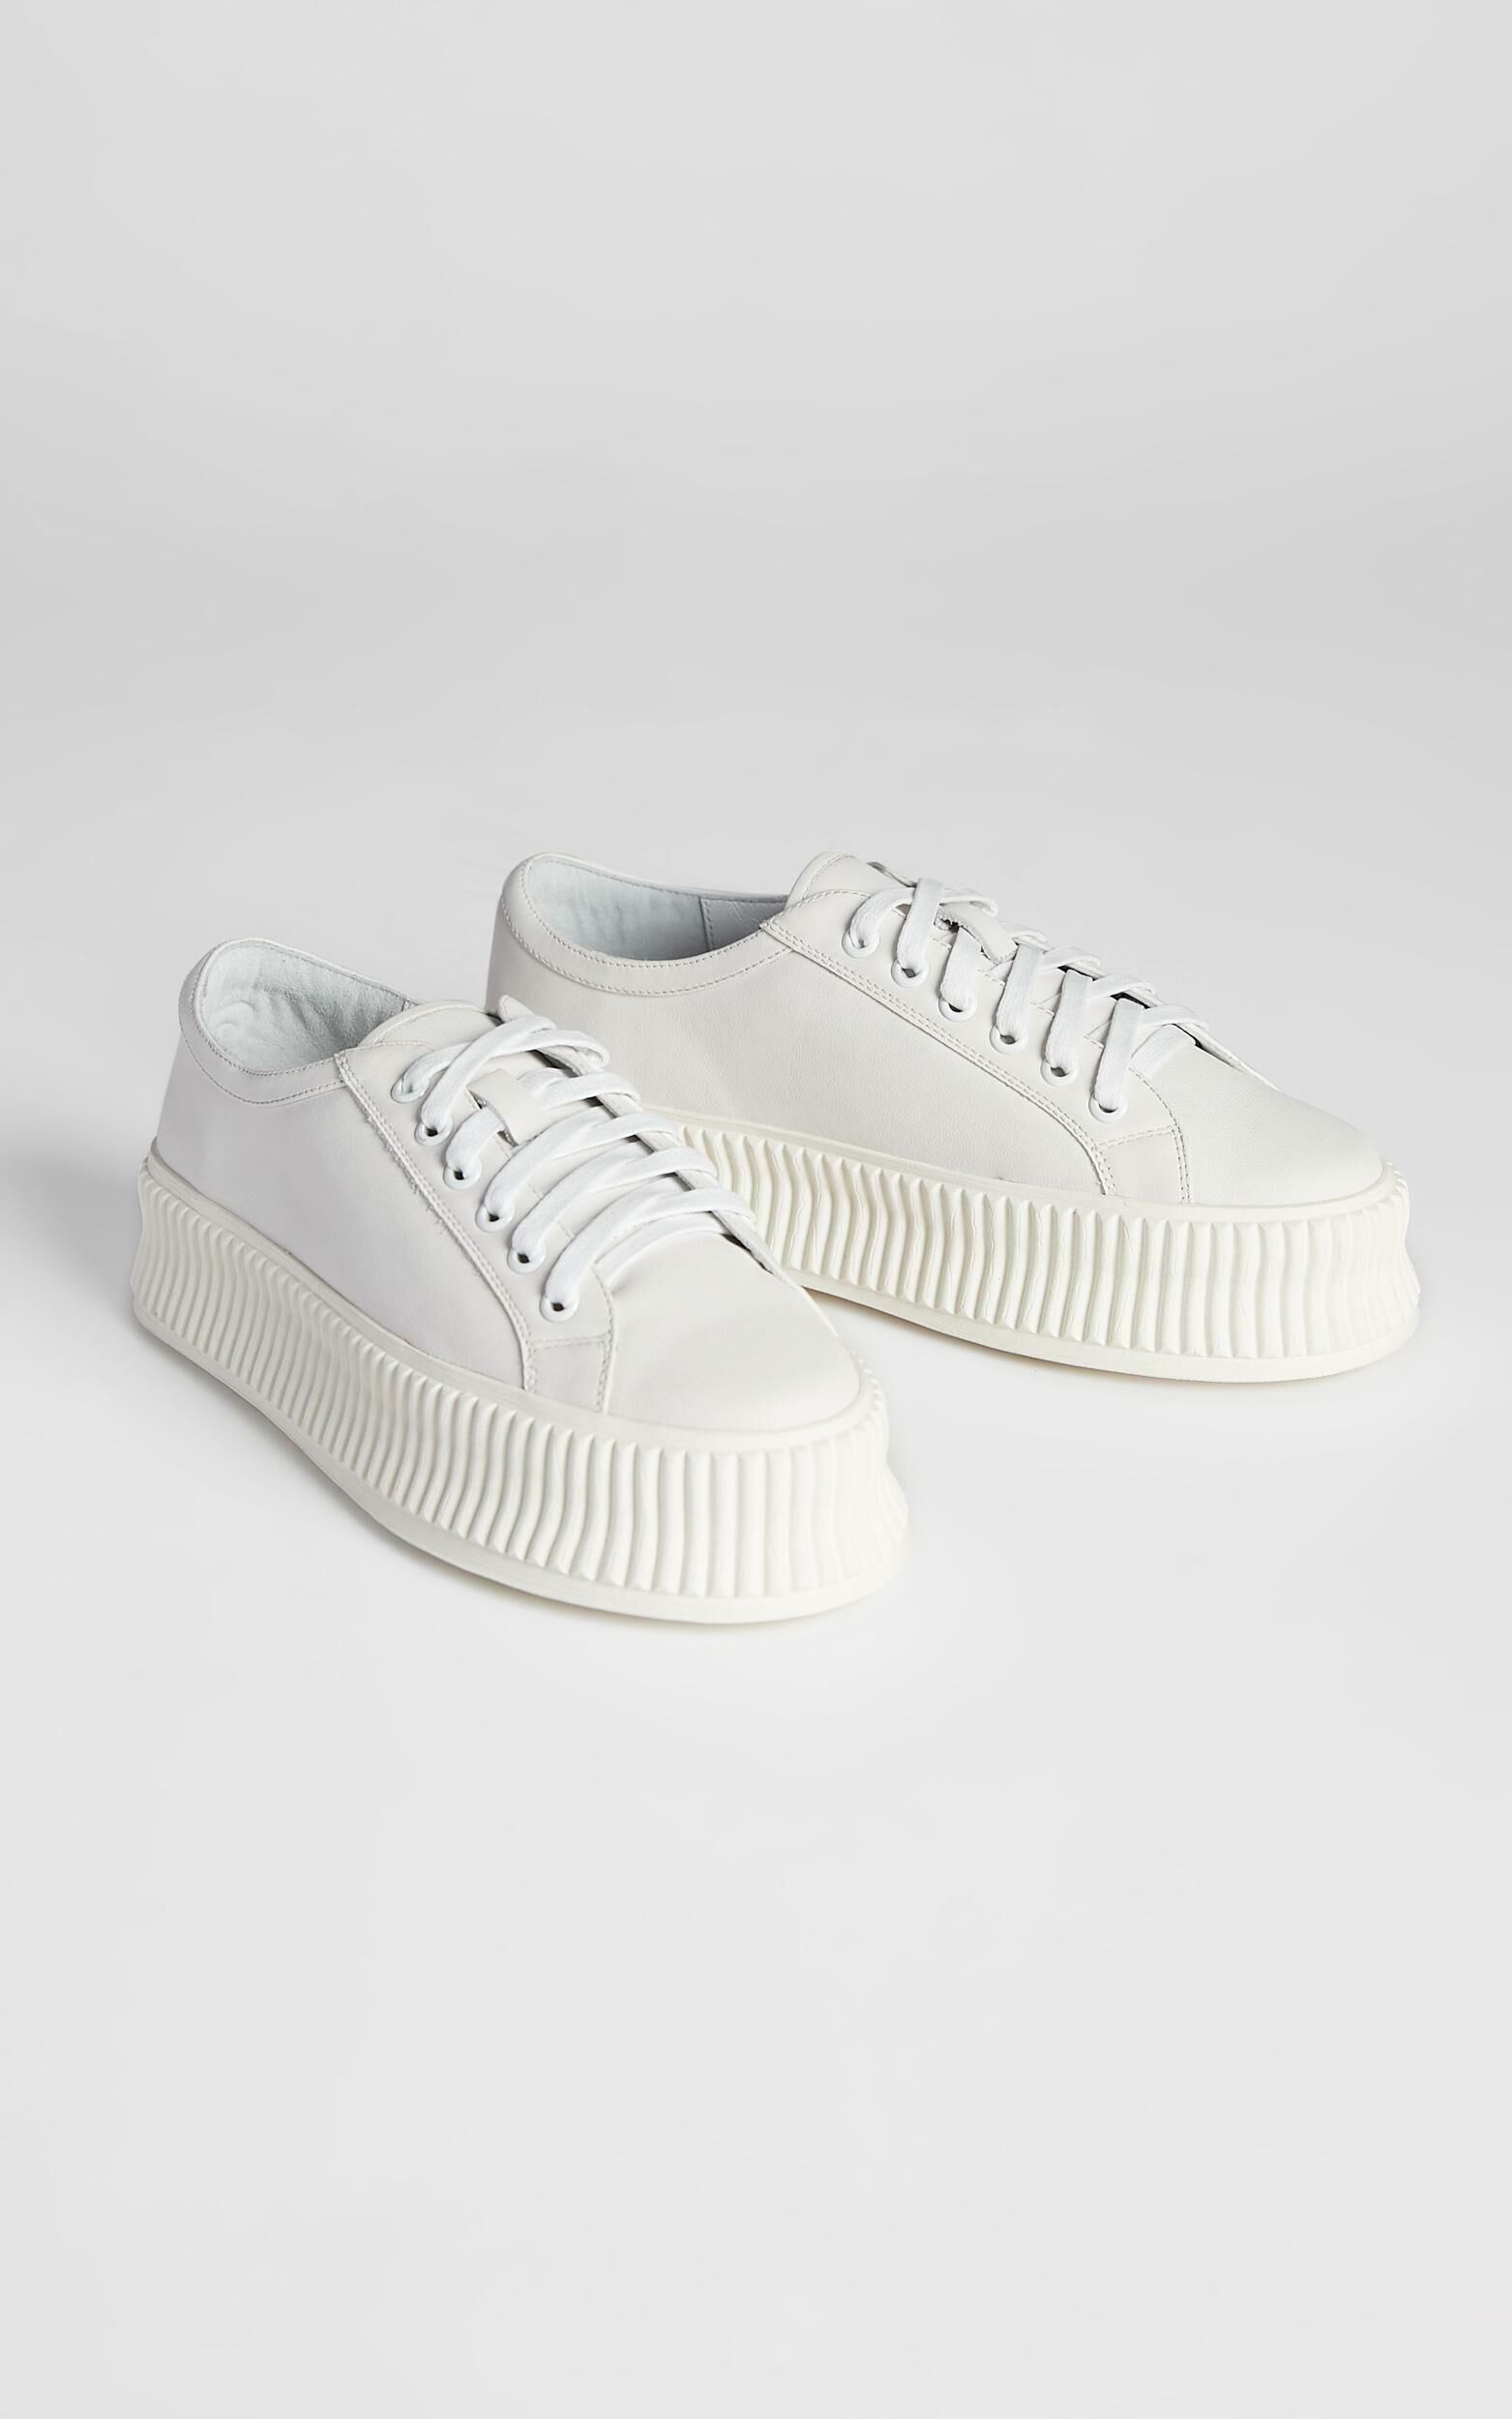 Alias Mae - Adelaide Sneakers in White Napper Leather